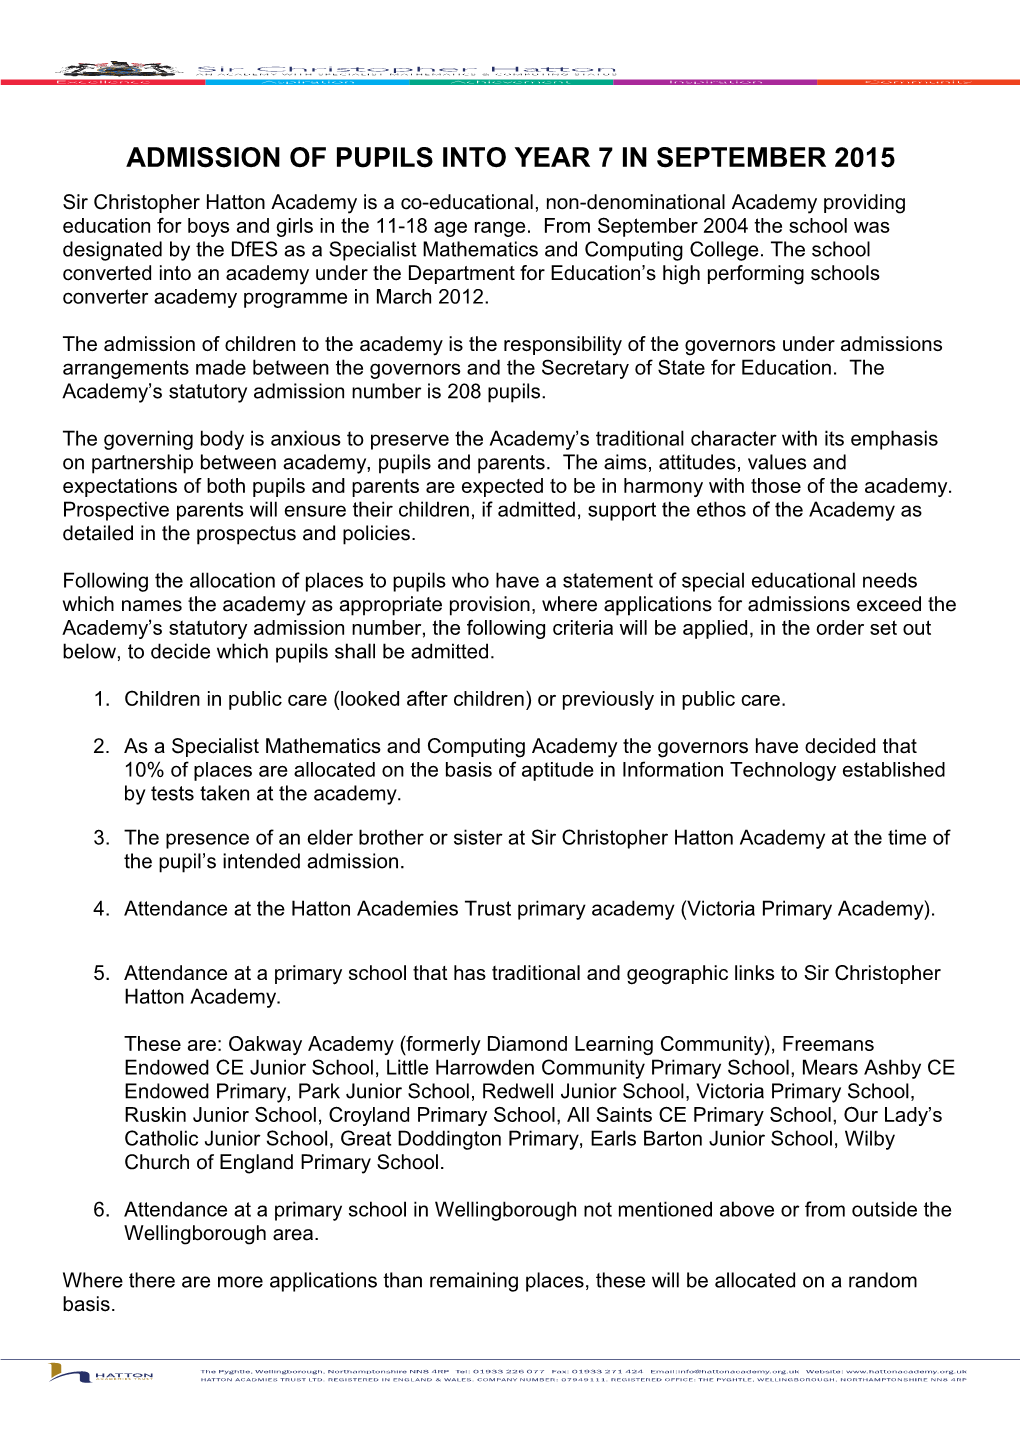 Admission of Pupils Into Year 7 in September 2015